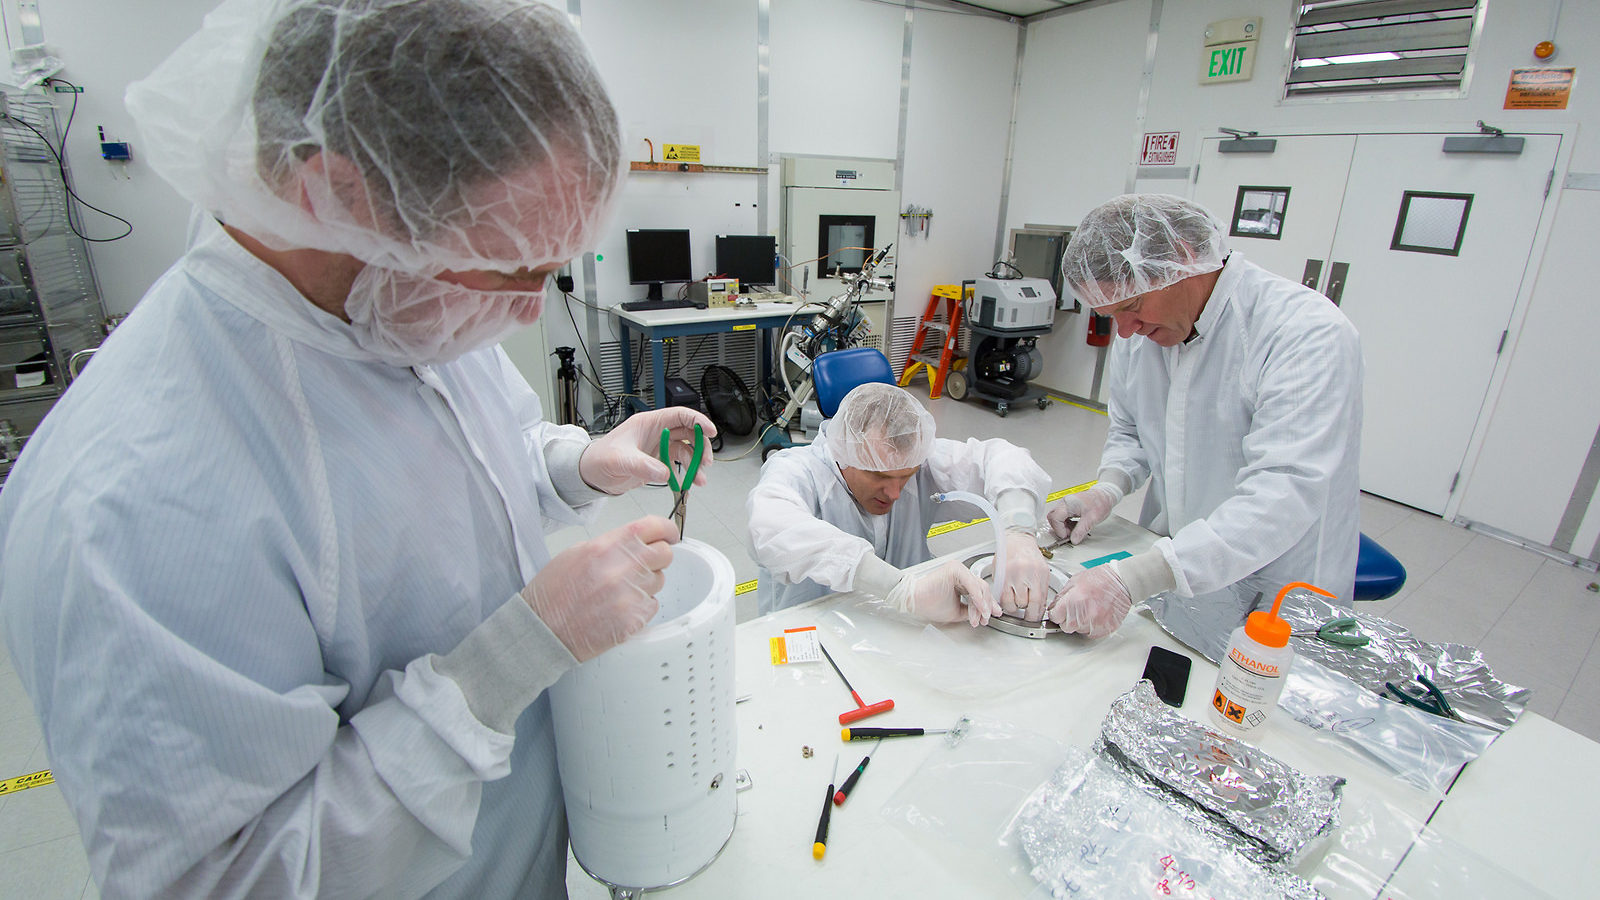 Scientists in a cleanroom assemble the prototype for the LZ detector’s core.